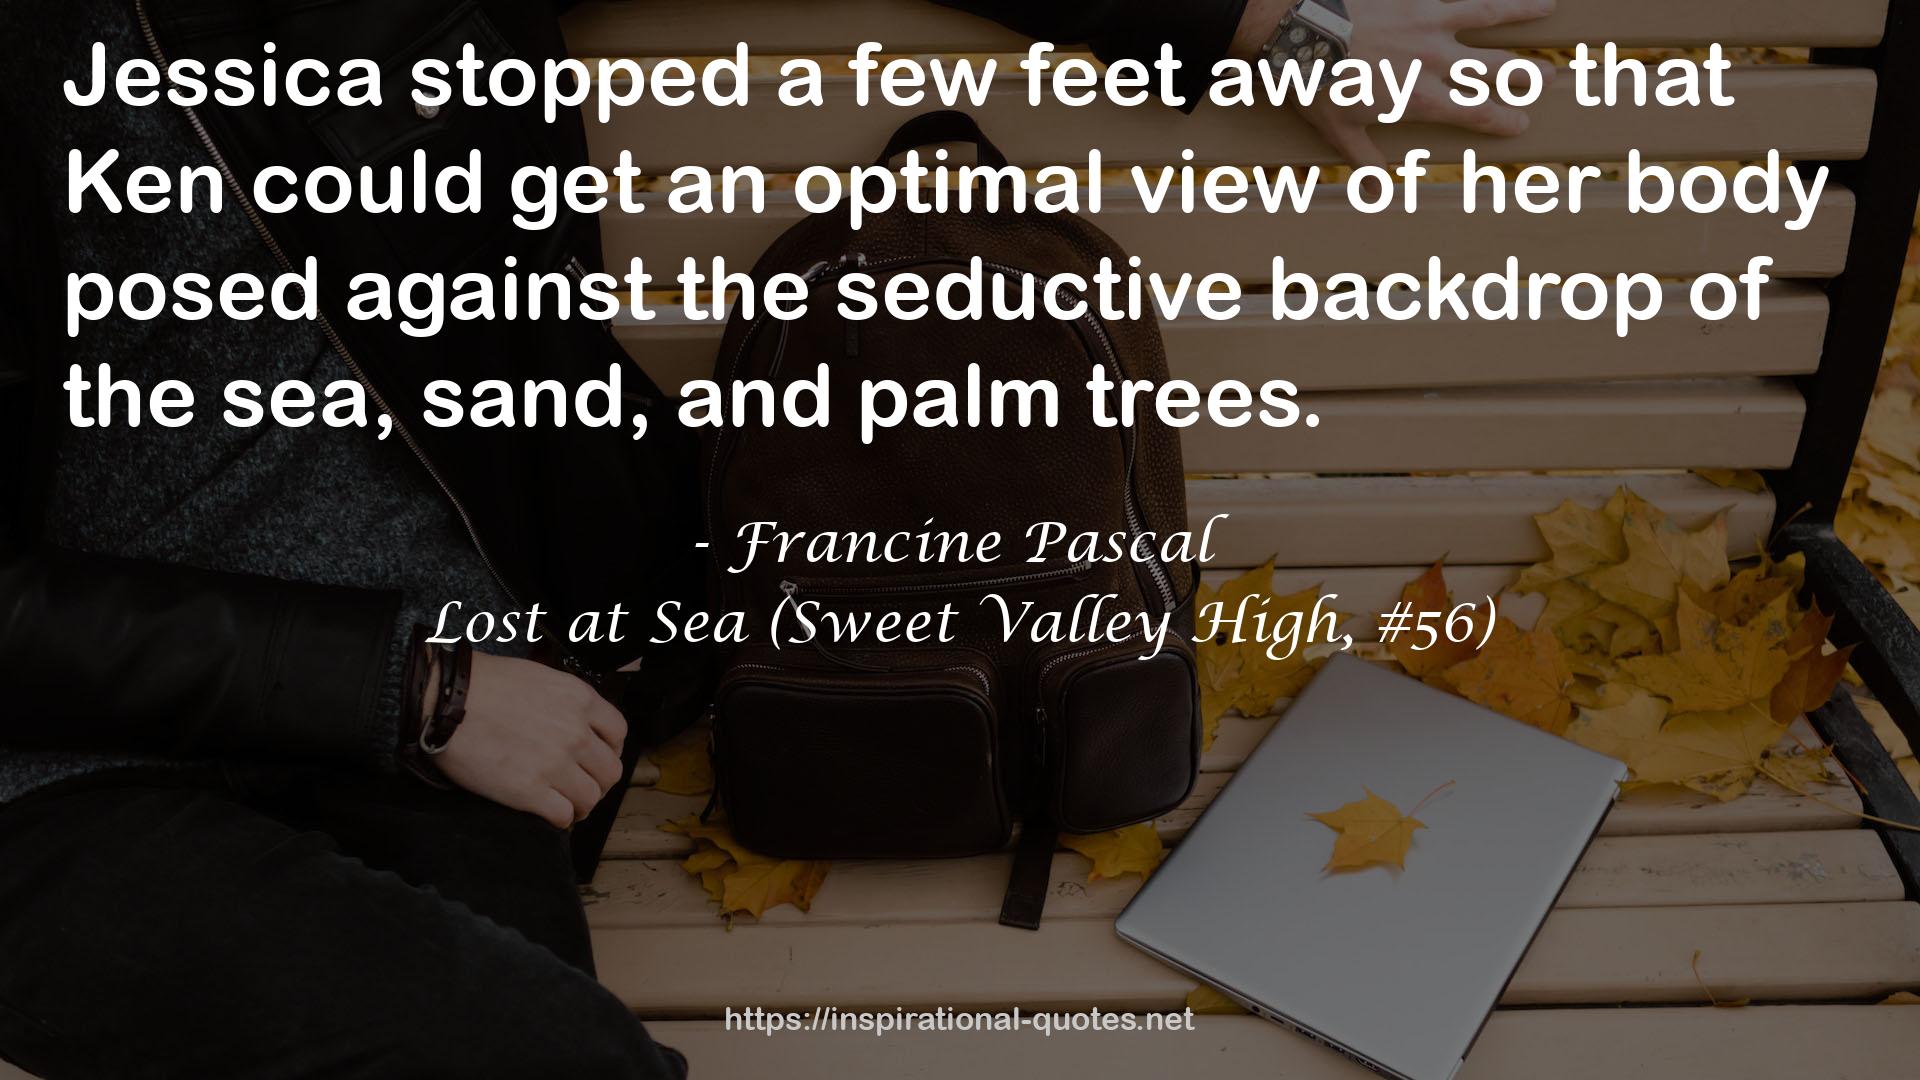 Lost at Sea (Sweet Valley High, #56) QUOTES